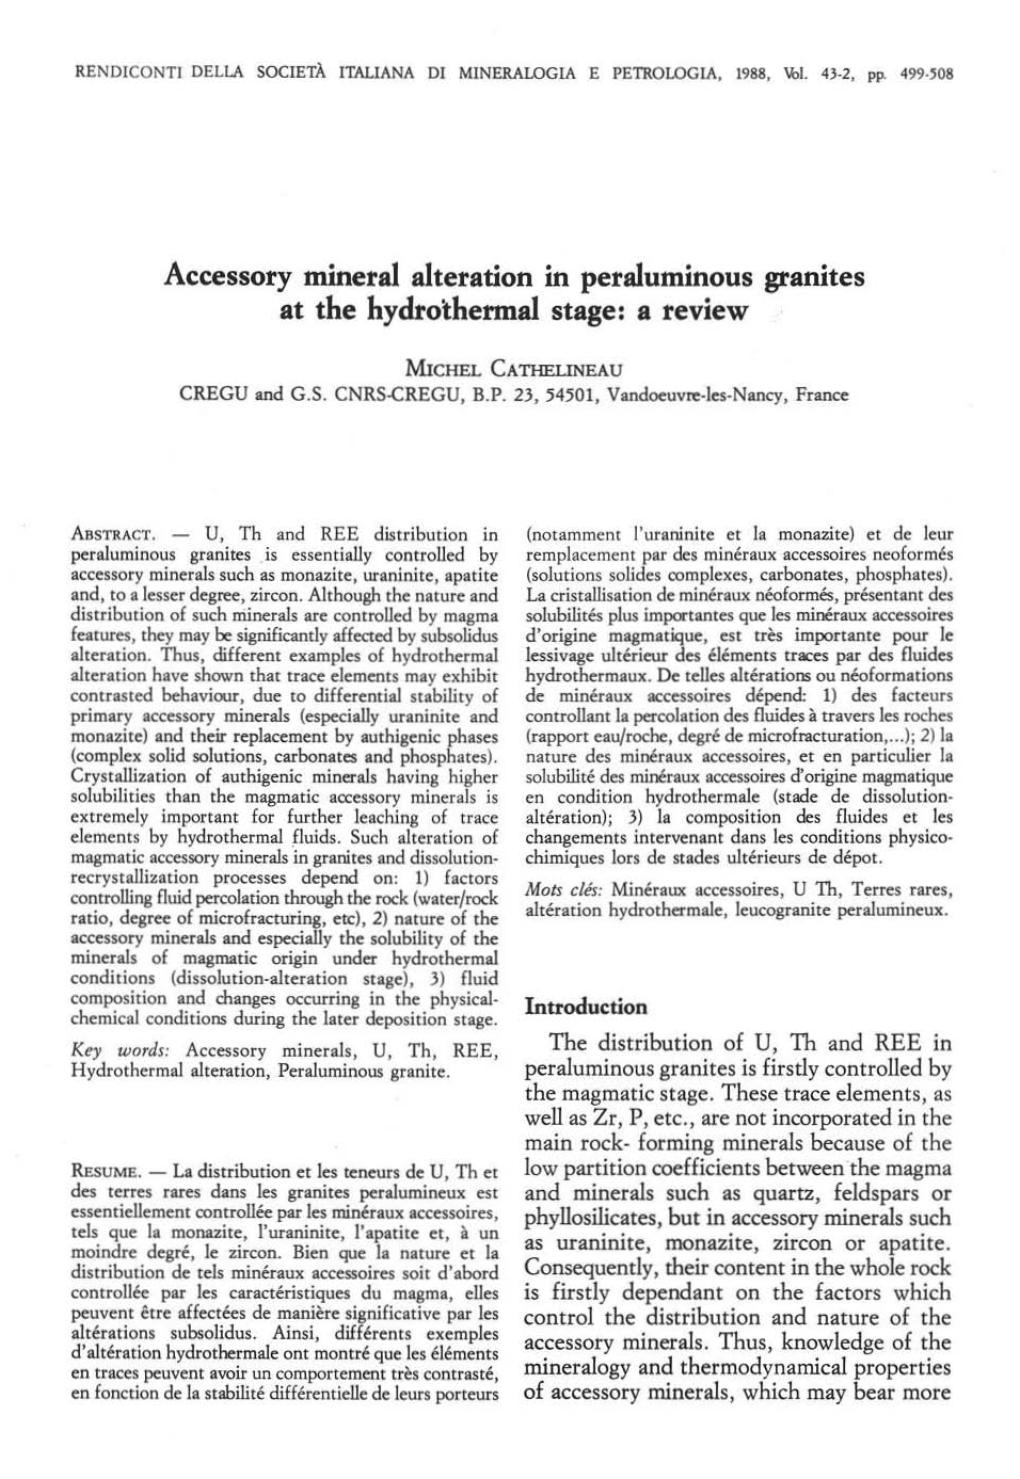 Accessory Mineral Alteration in Peraluminous Granites at the Hydro~Hermal Stage: a Review